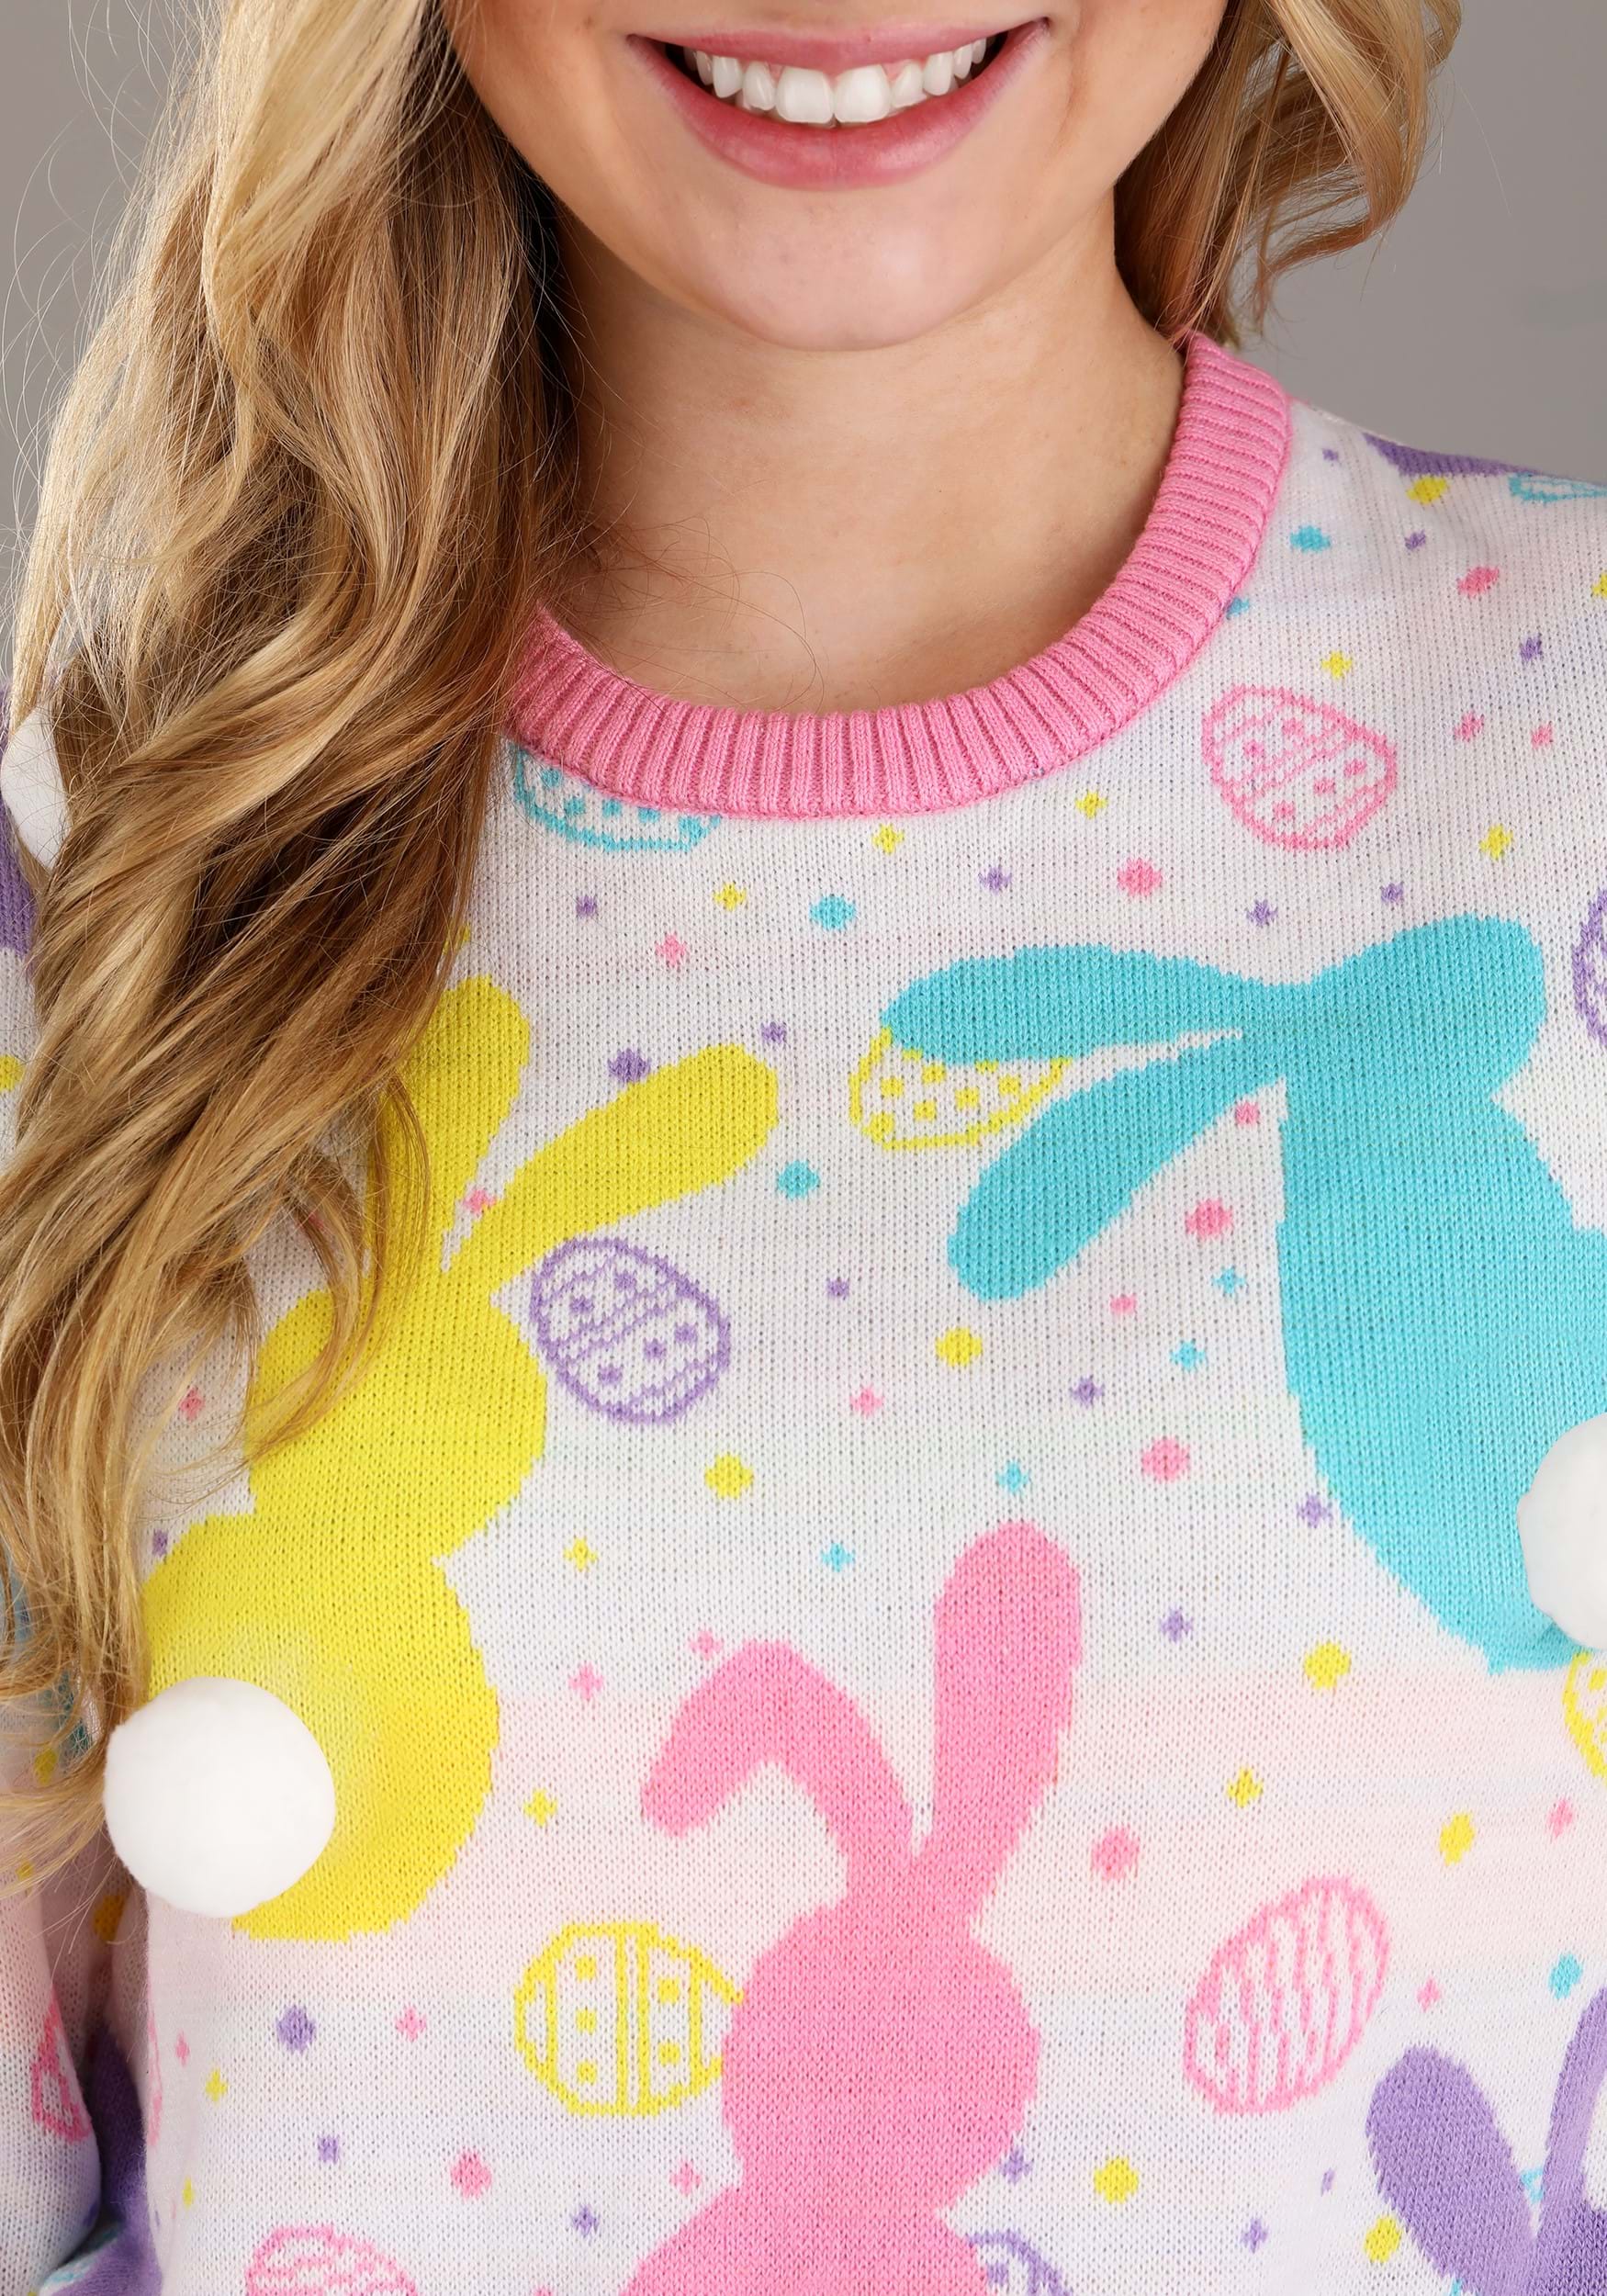 Adult Easter Bunny Ugly Sweater